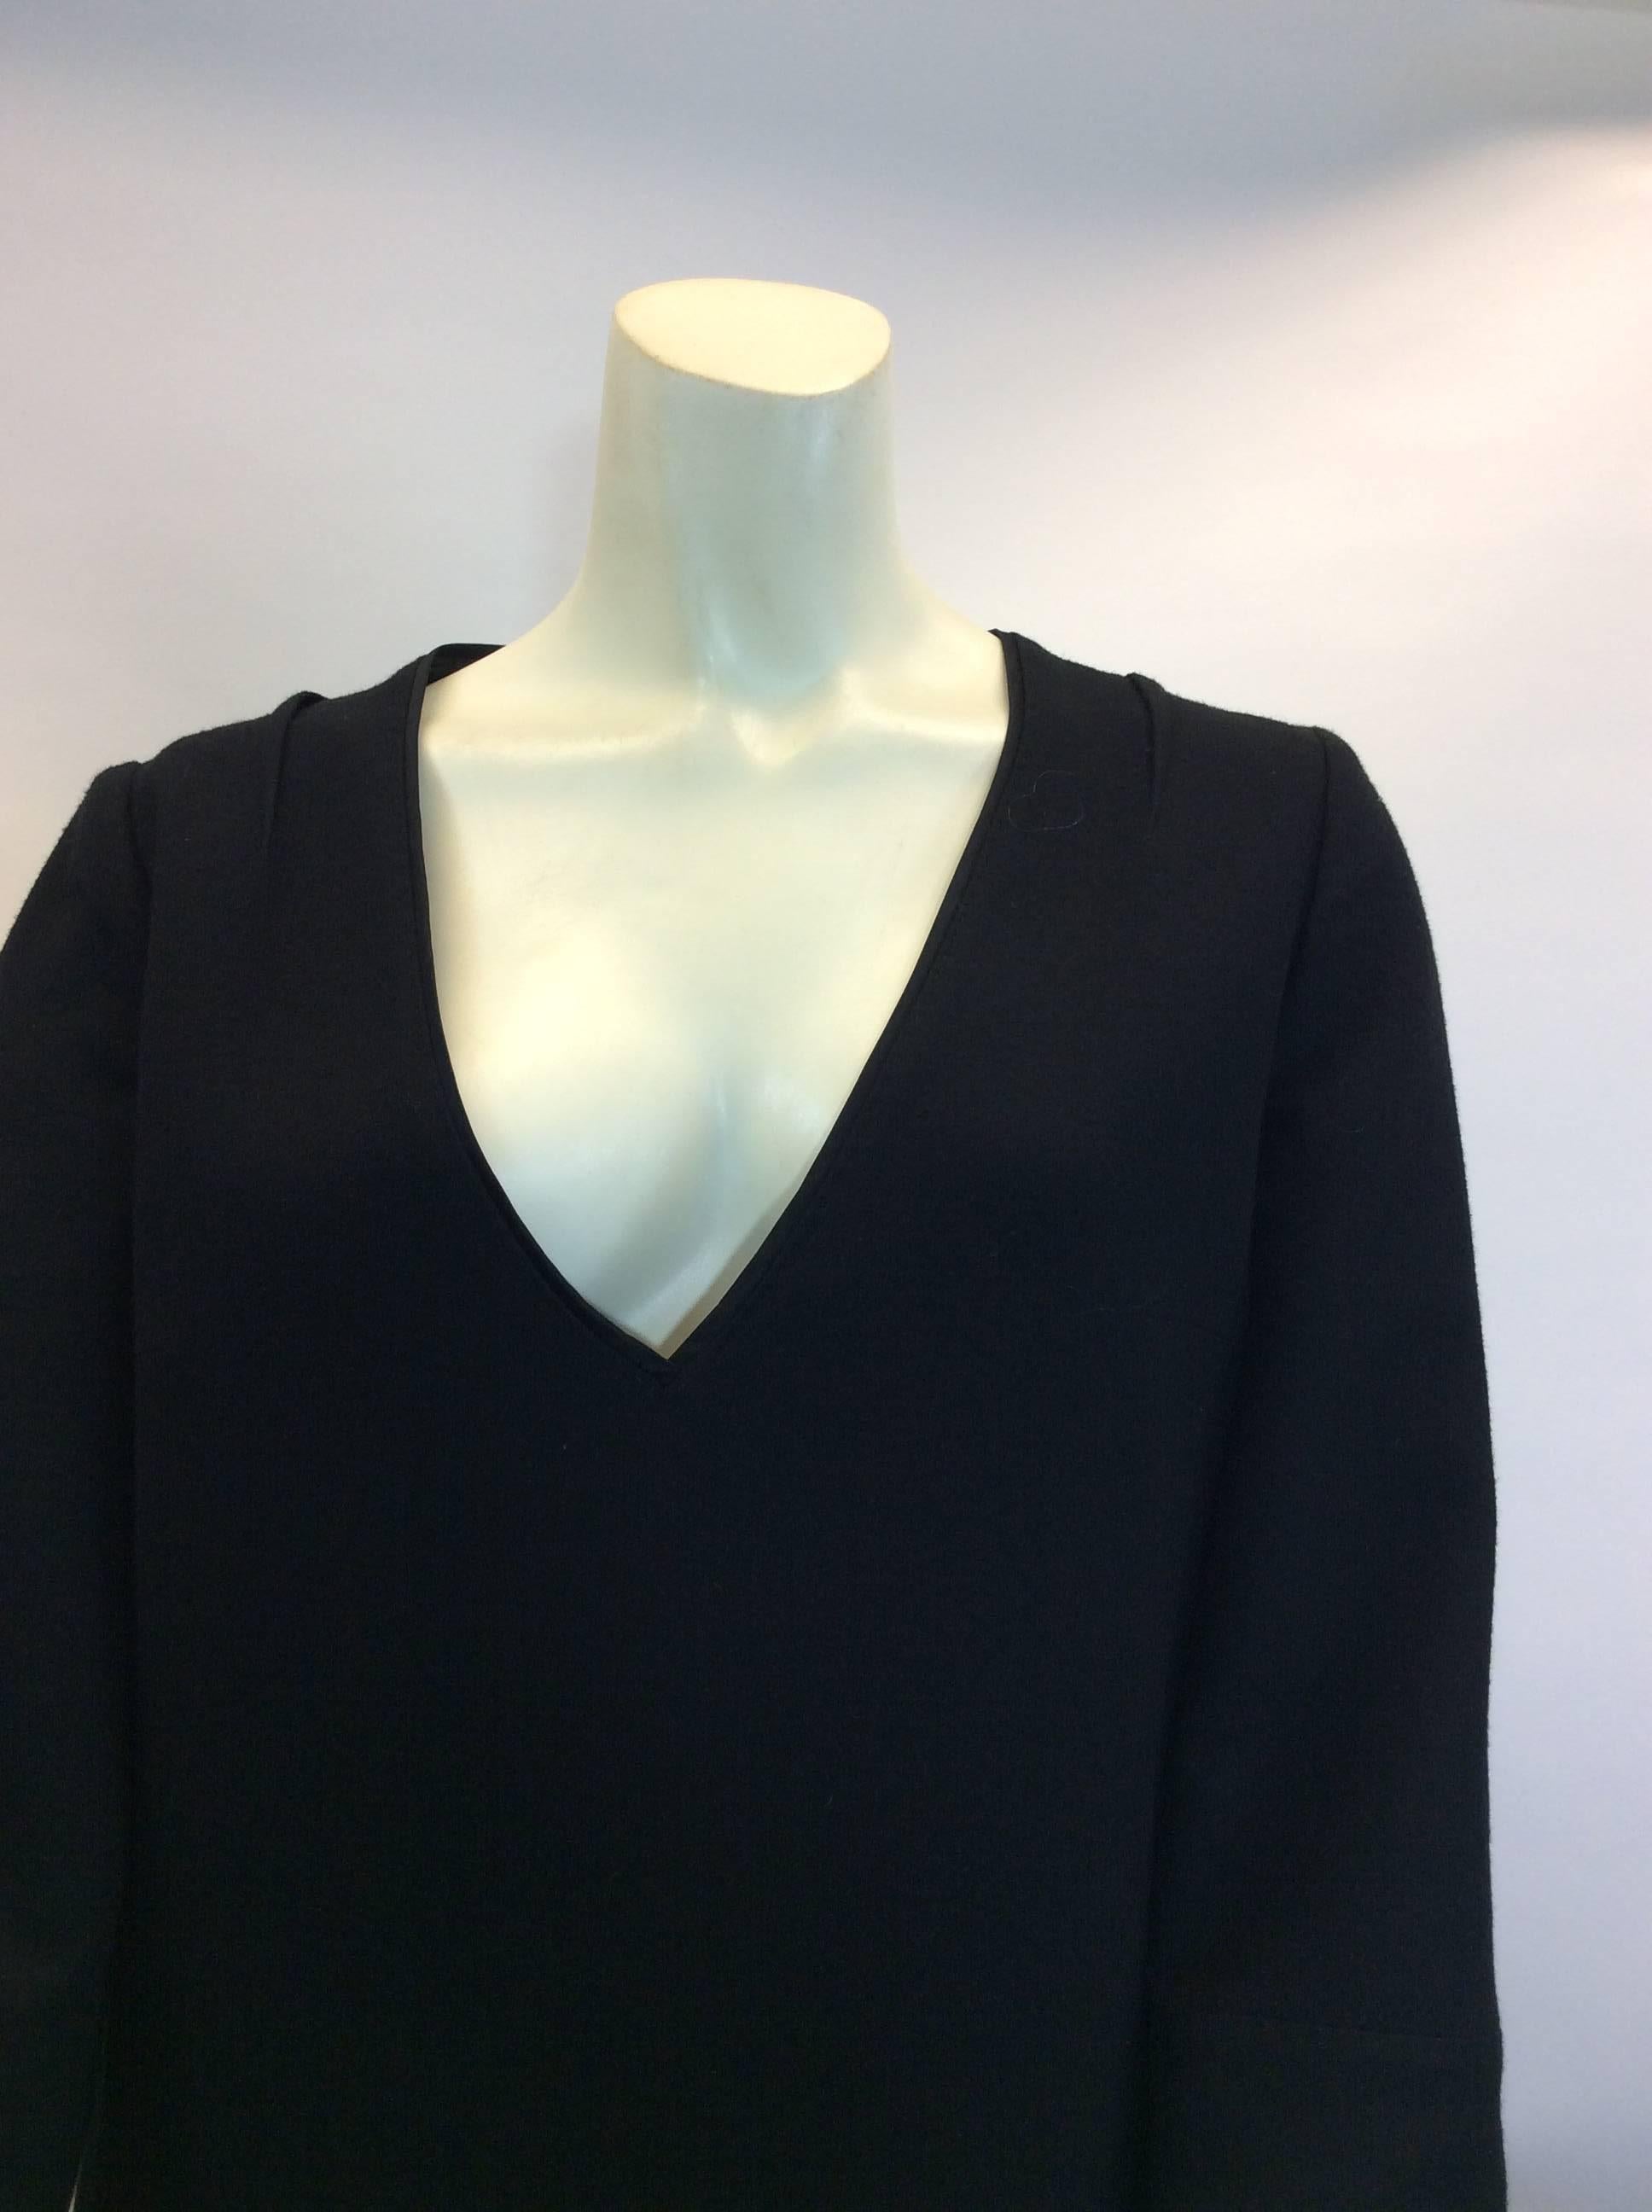 Costume National Black Wool Dress
Size 40
$450
V neck style
100% wool
Fully lined, 100% silk 